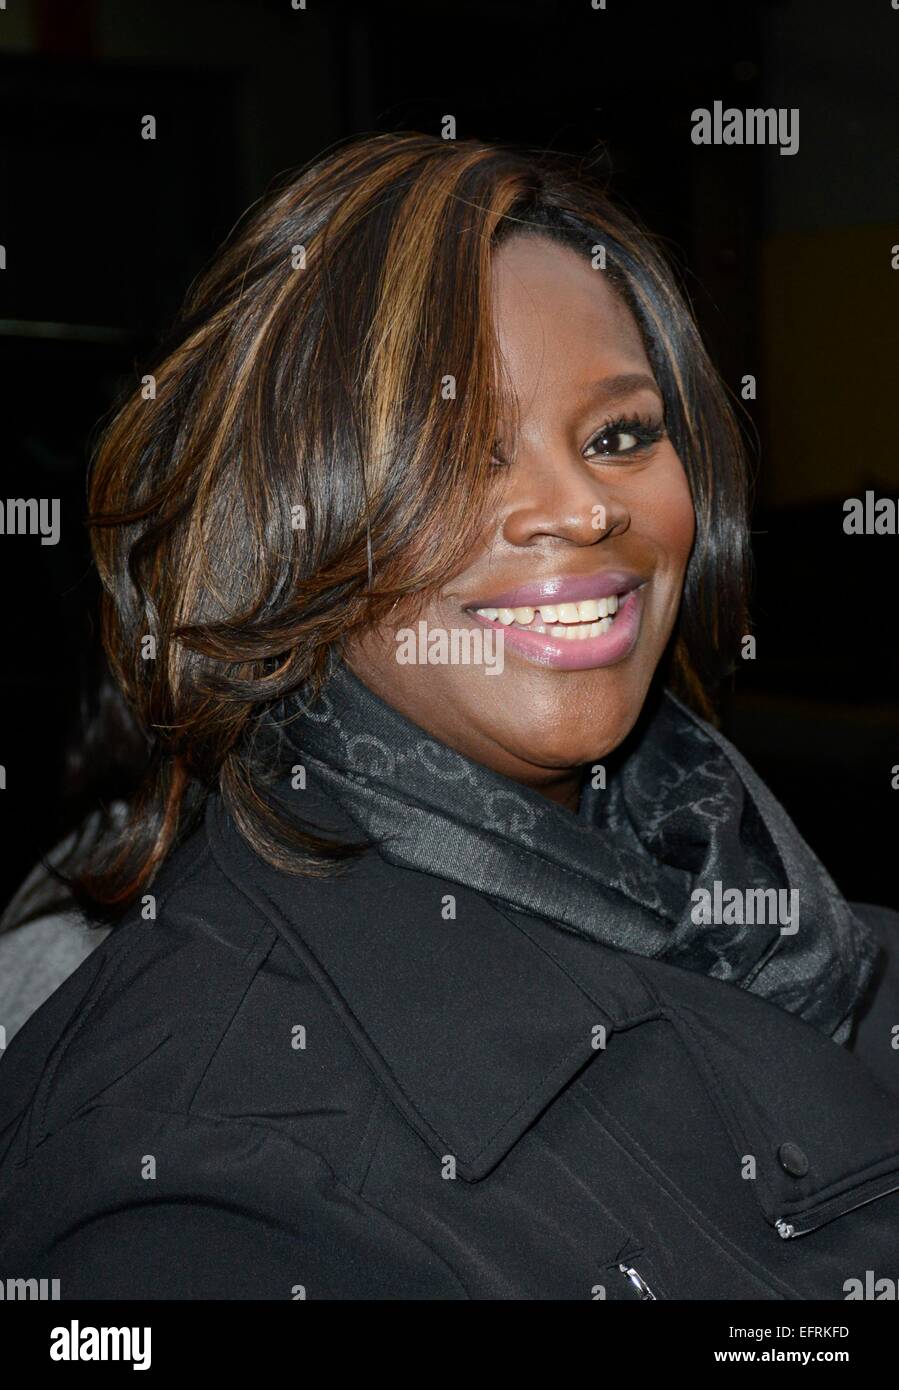 New York, NY, USA. 9th Feb, 2015. Retta out and about for Celebrity Candids - MON, New York, NY February 9, 2015. Credit:  Derek Storm/Everett Collection/Alamy Live News Stock Photo